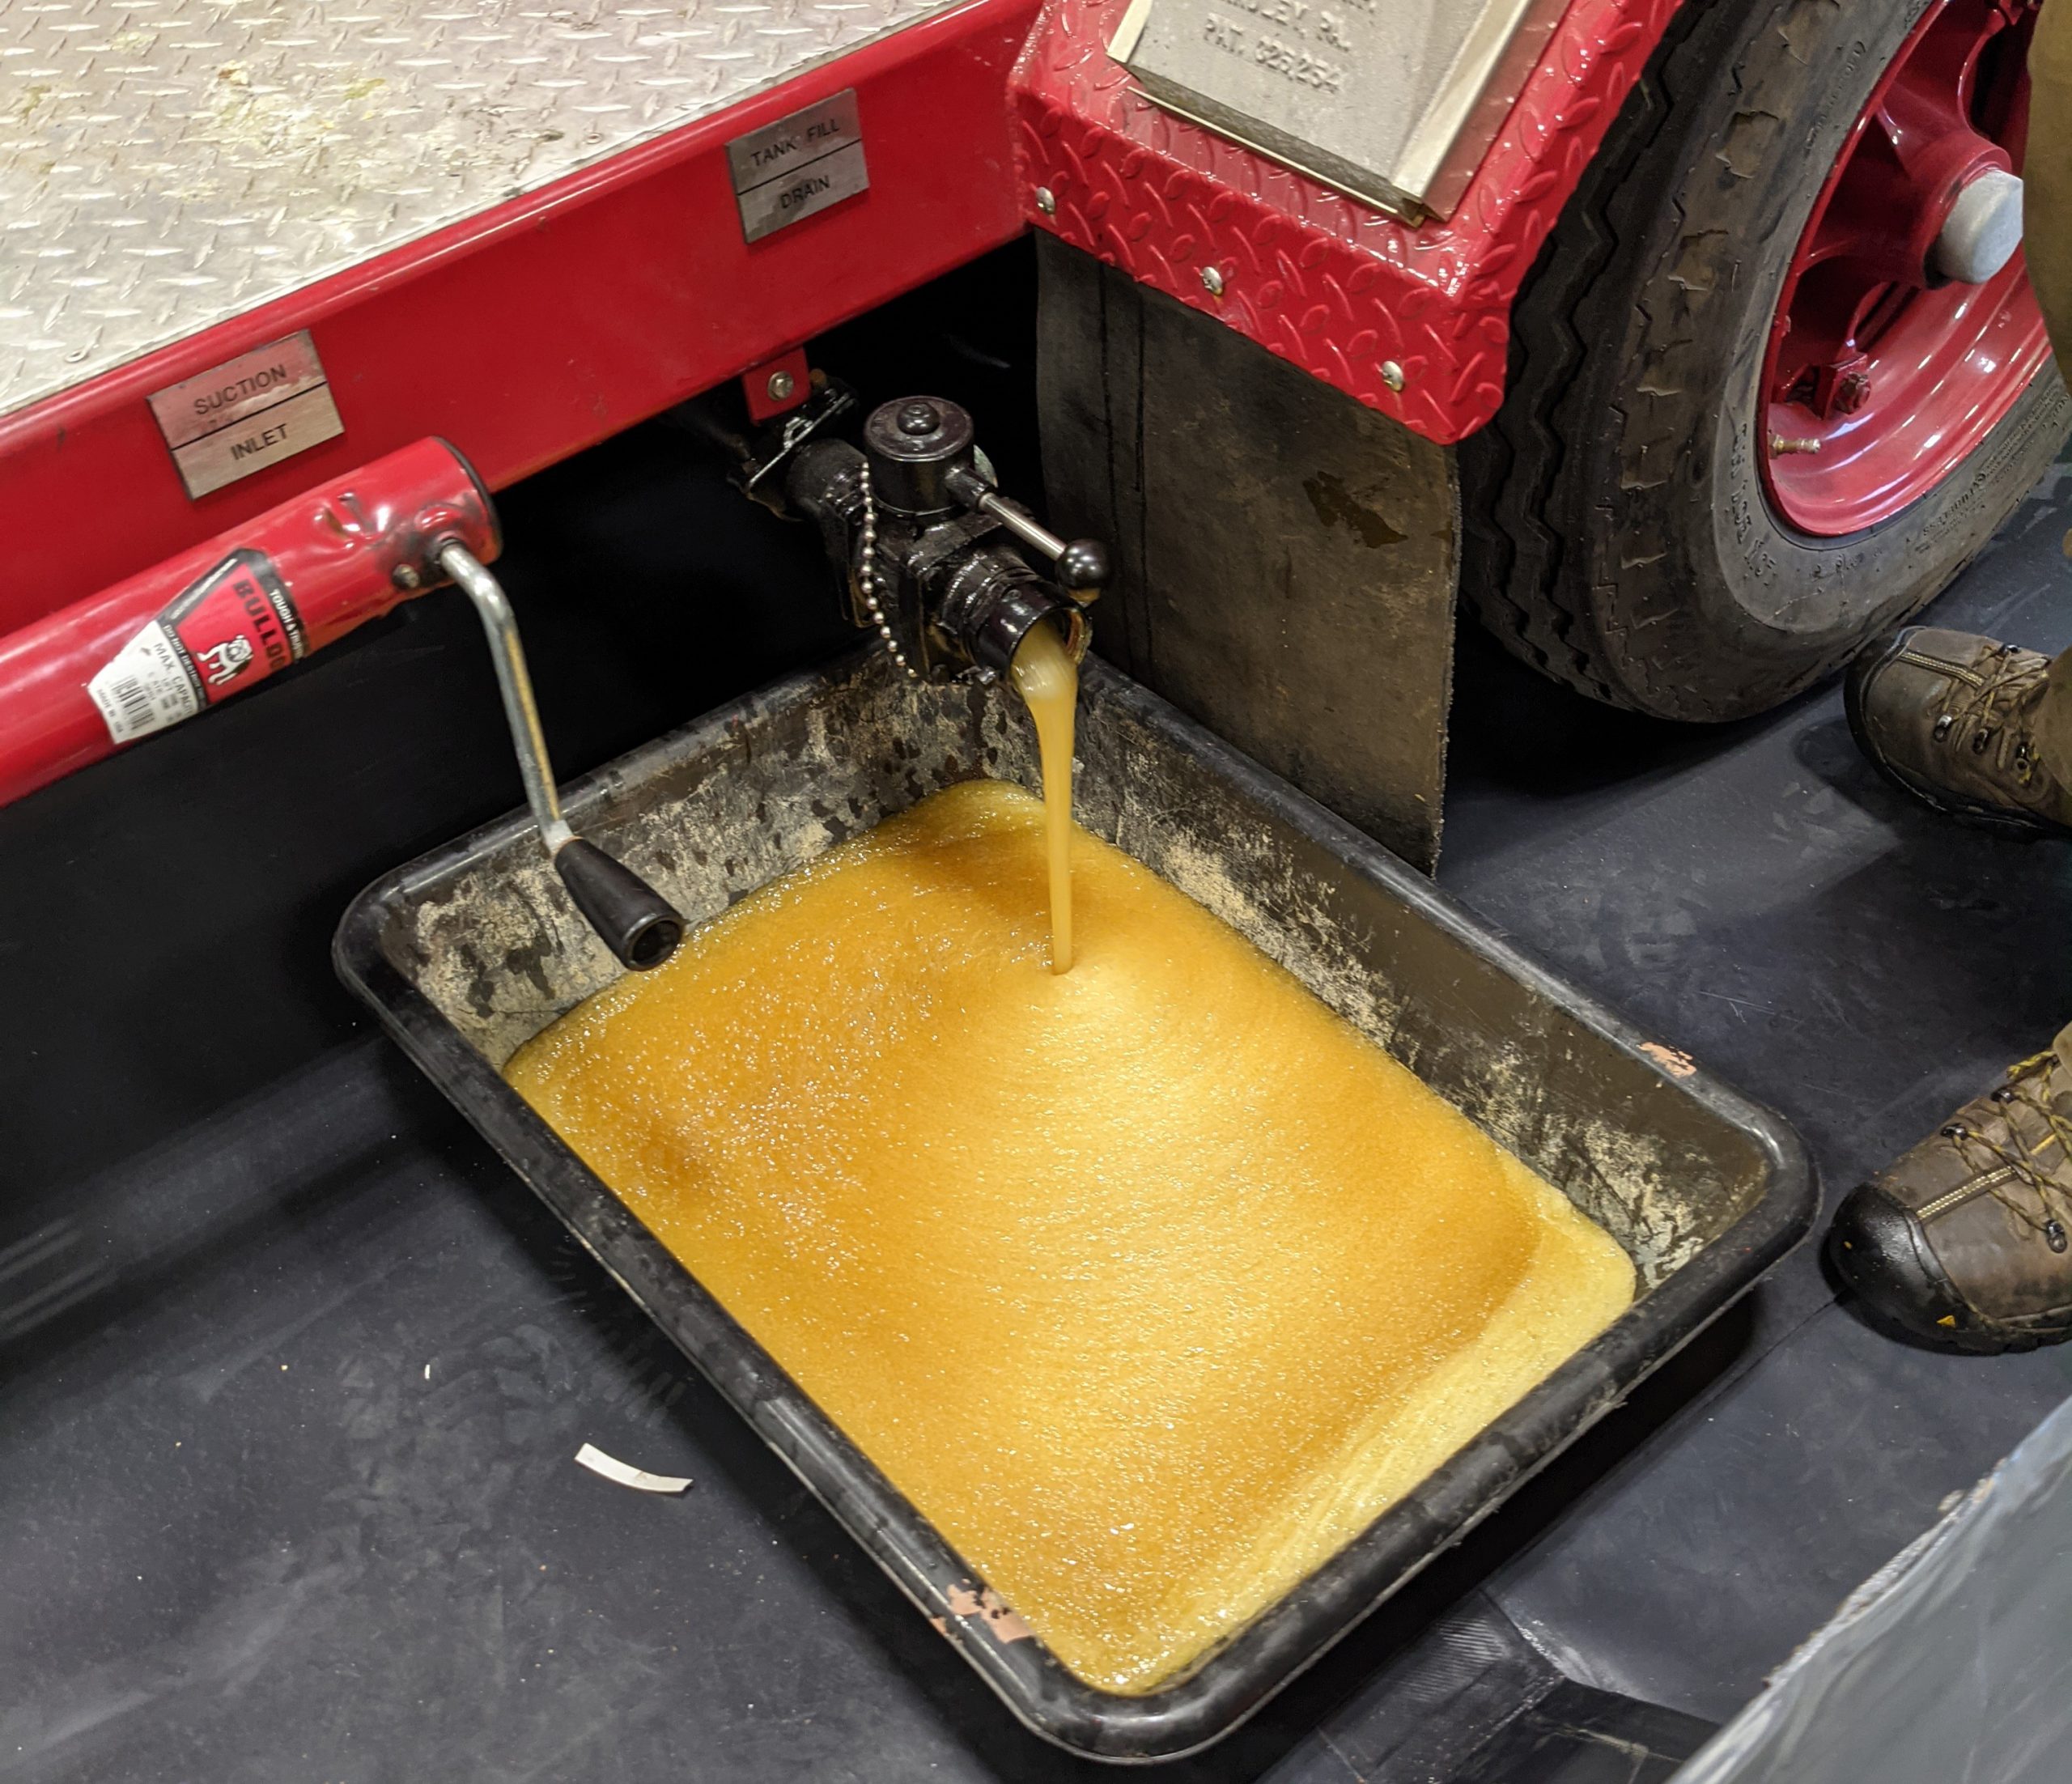 PerfluorAd is used for PFAS remediation at a fire station in Connecticut.